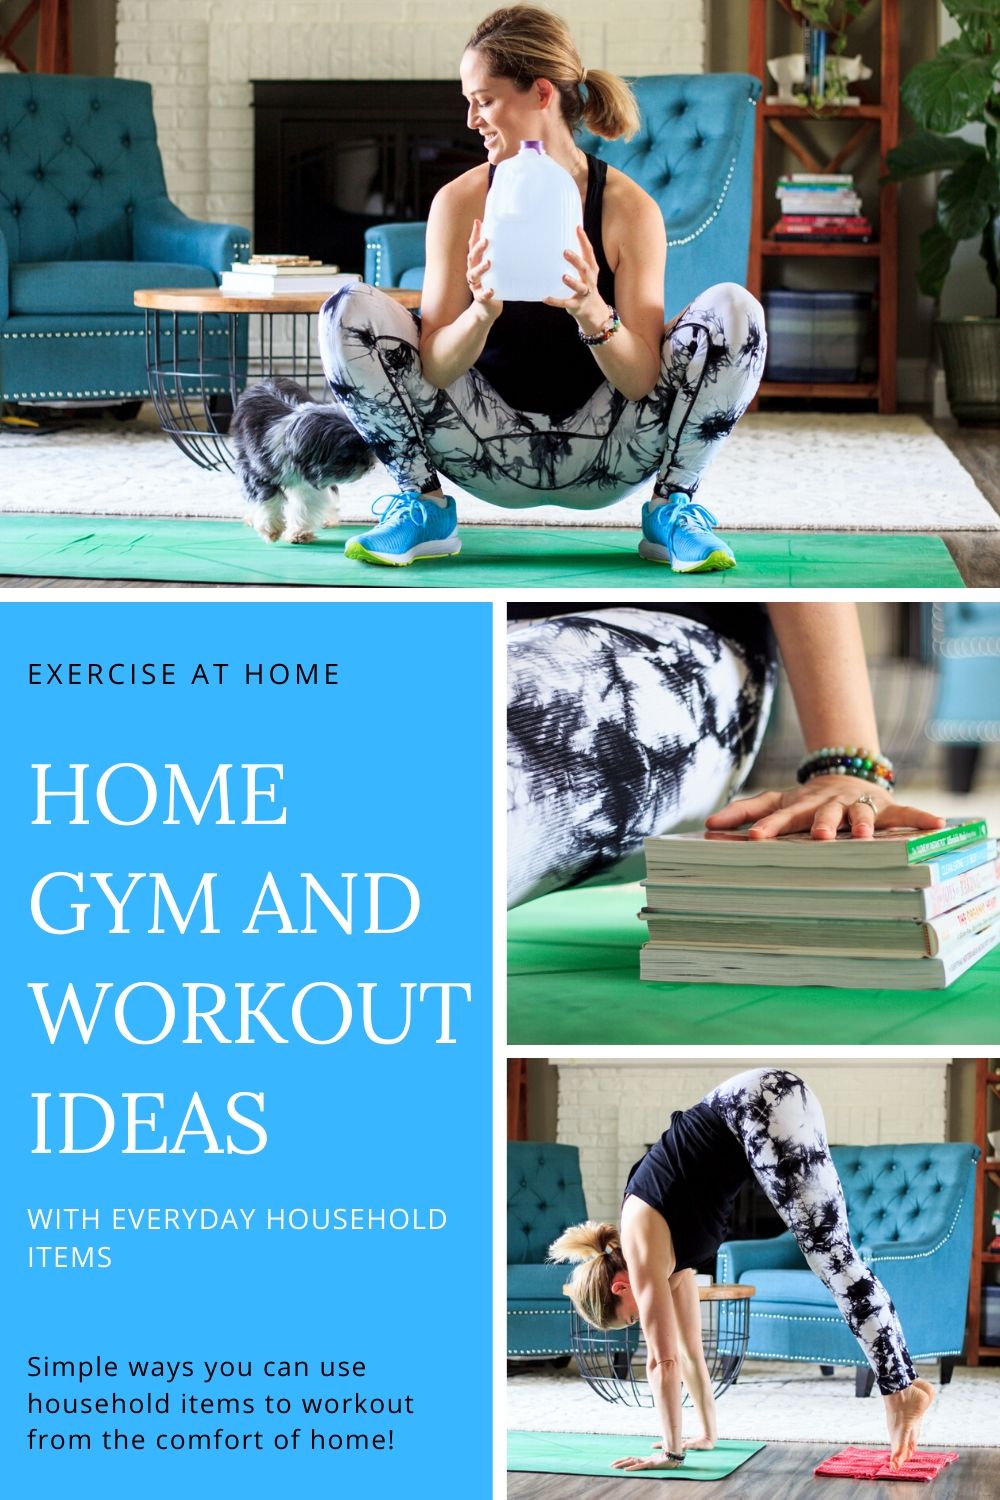 Household items exercise